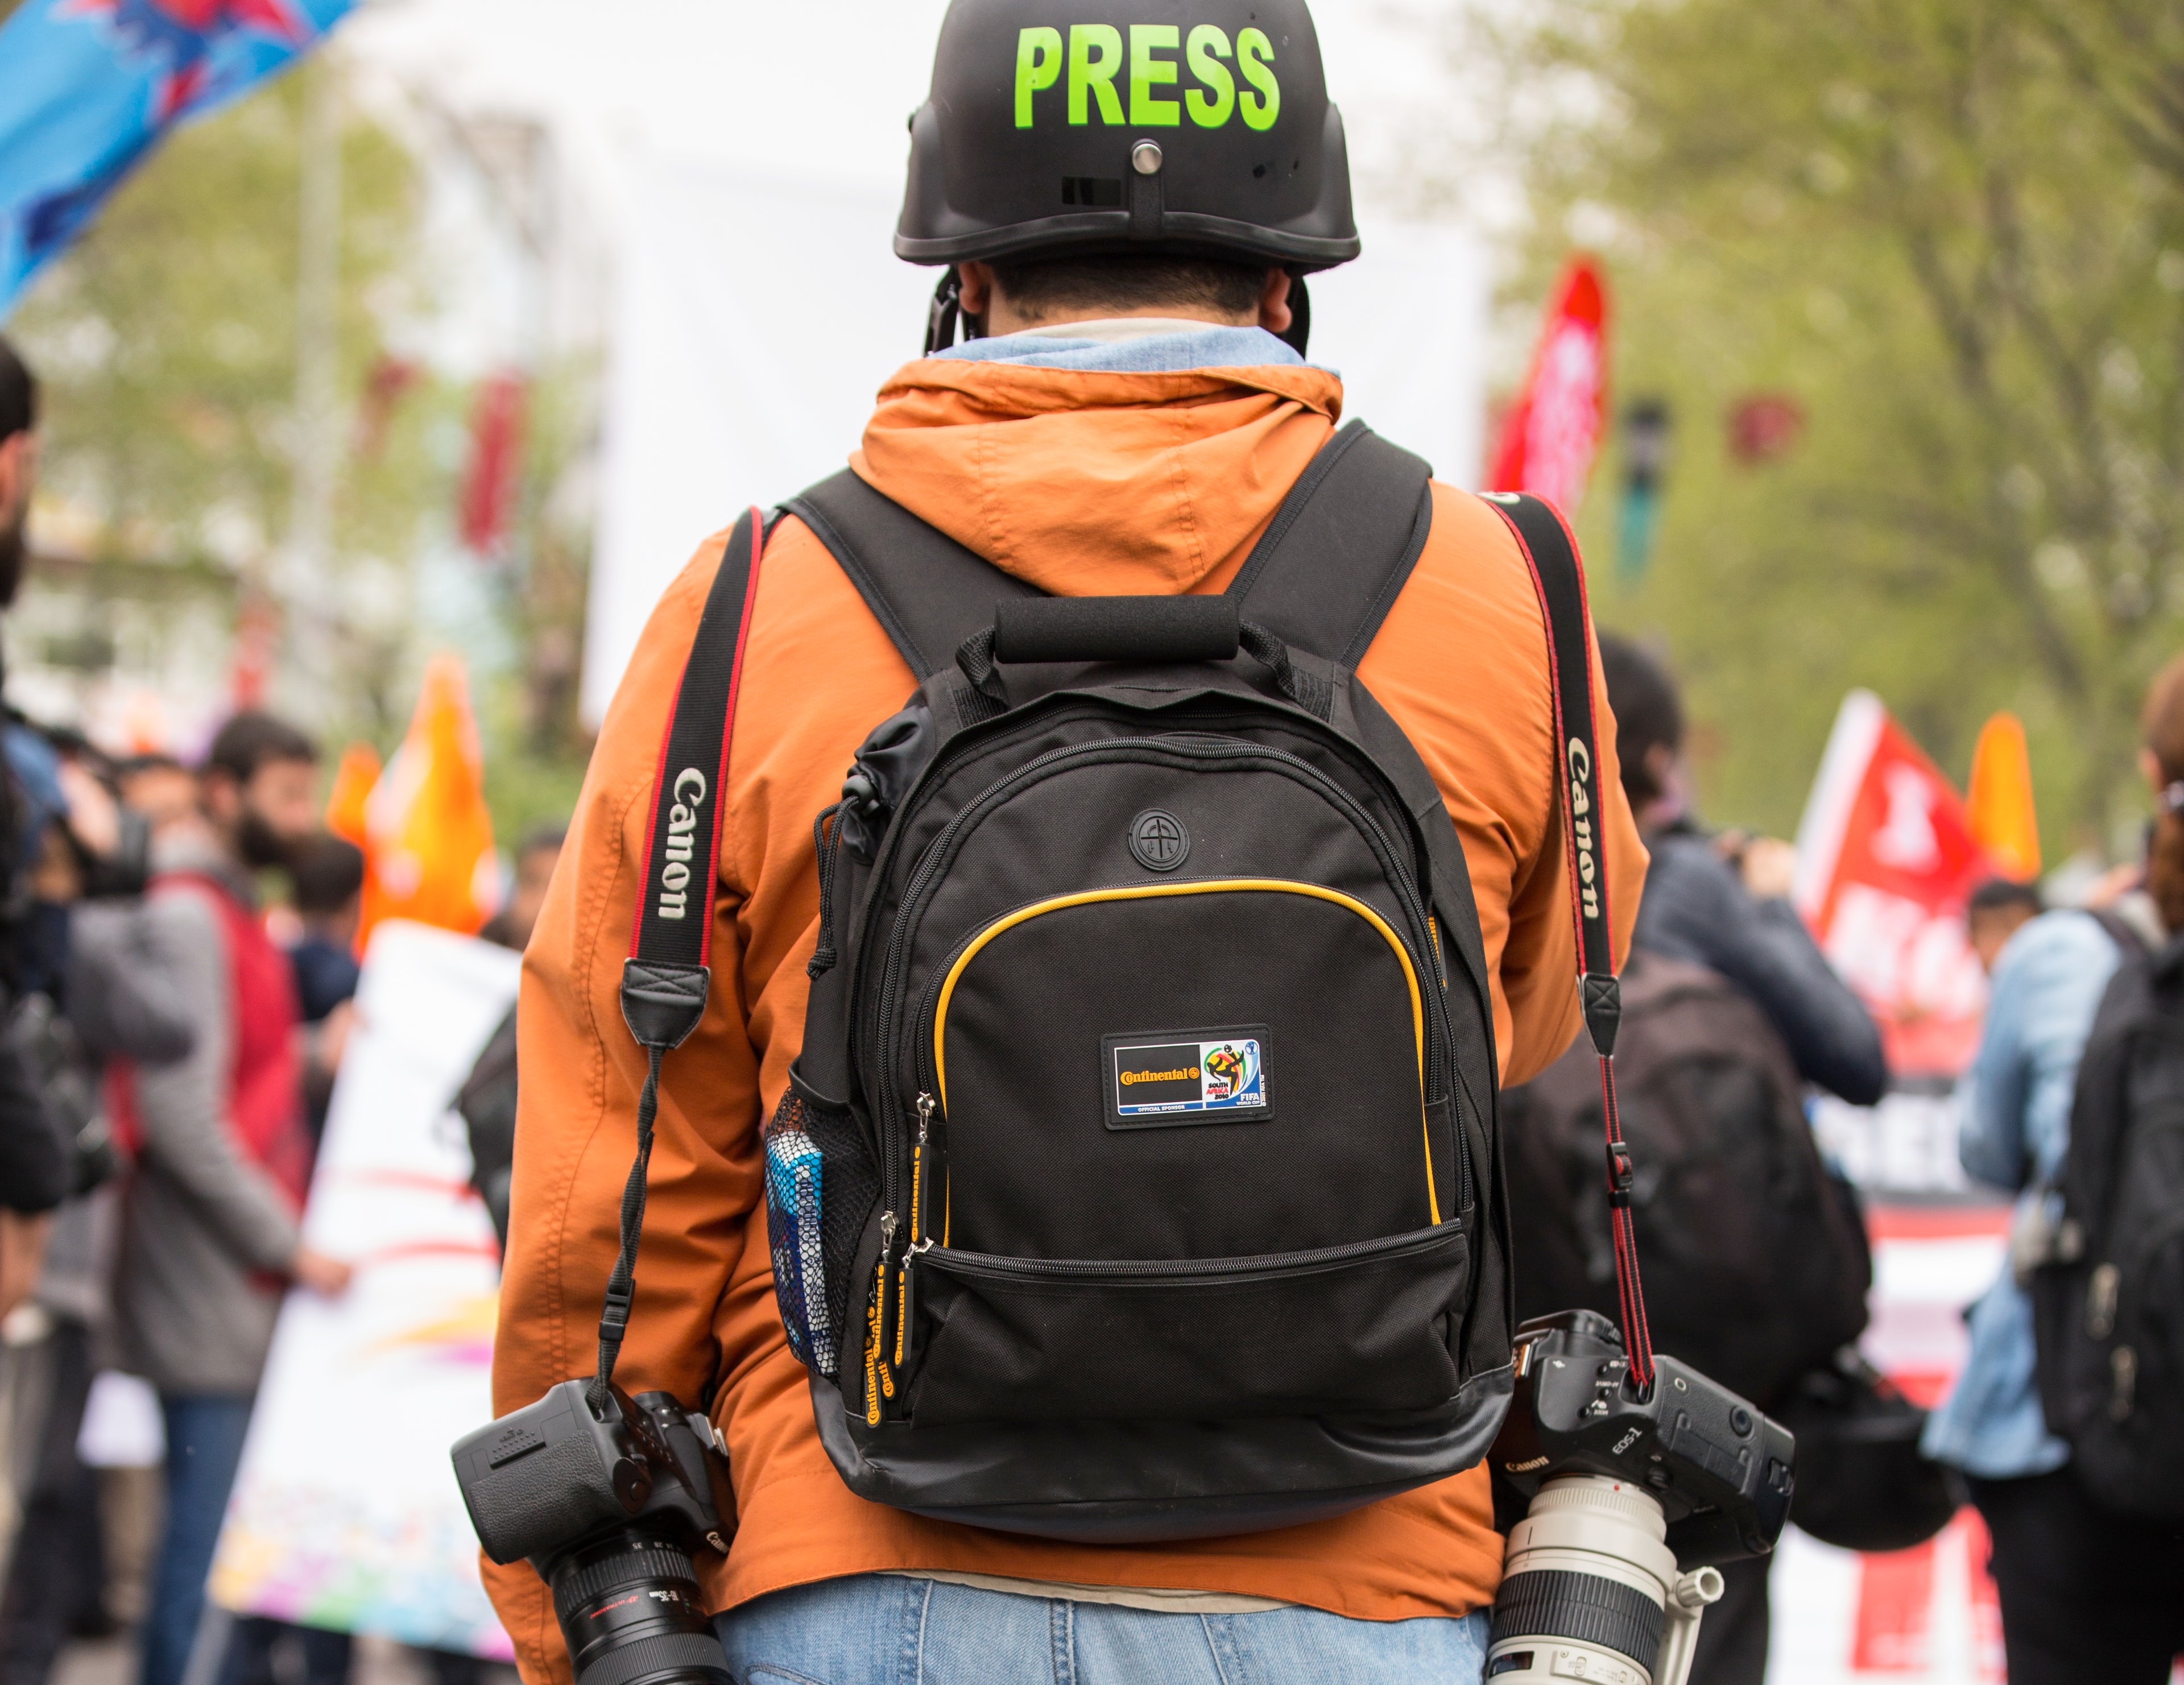 press person with backpack and helmet